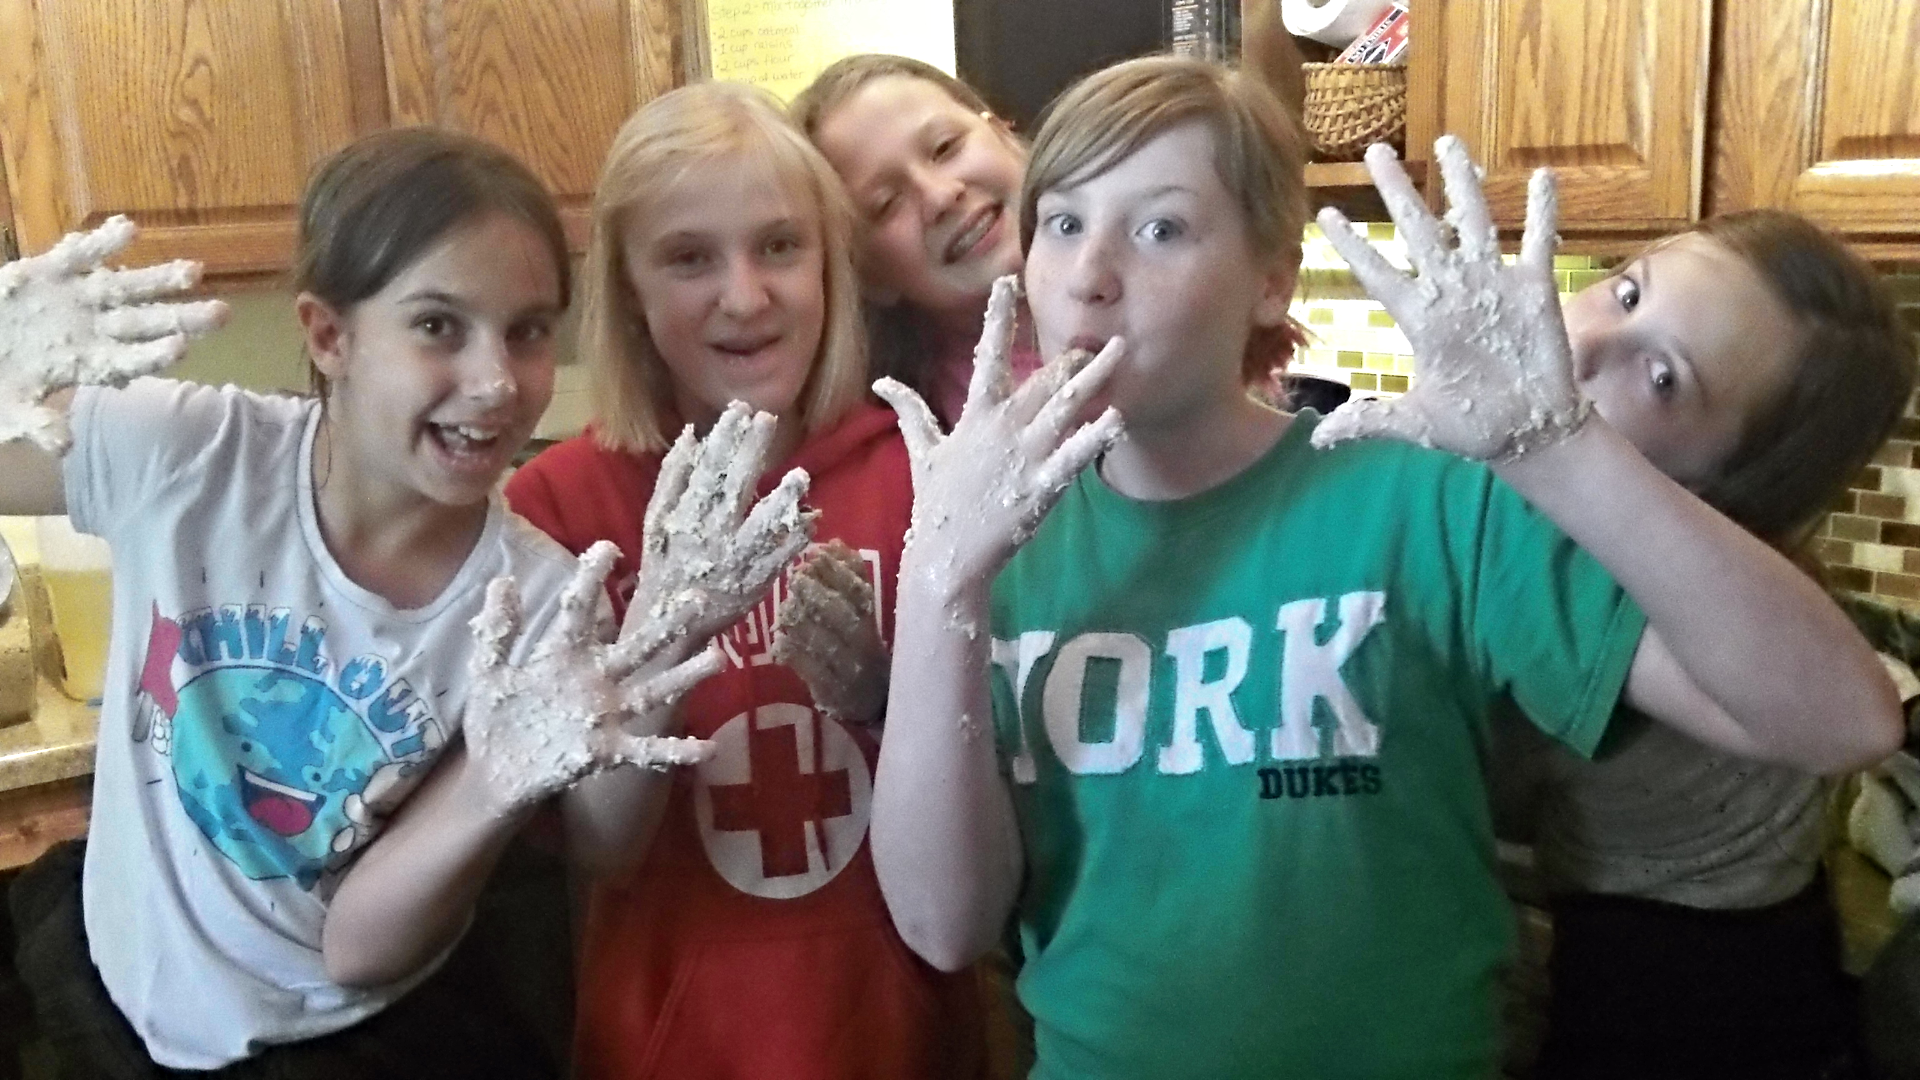 5 youths messy from baking.